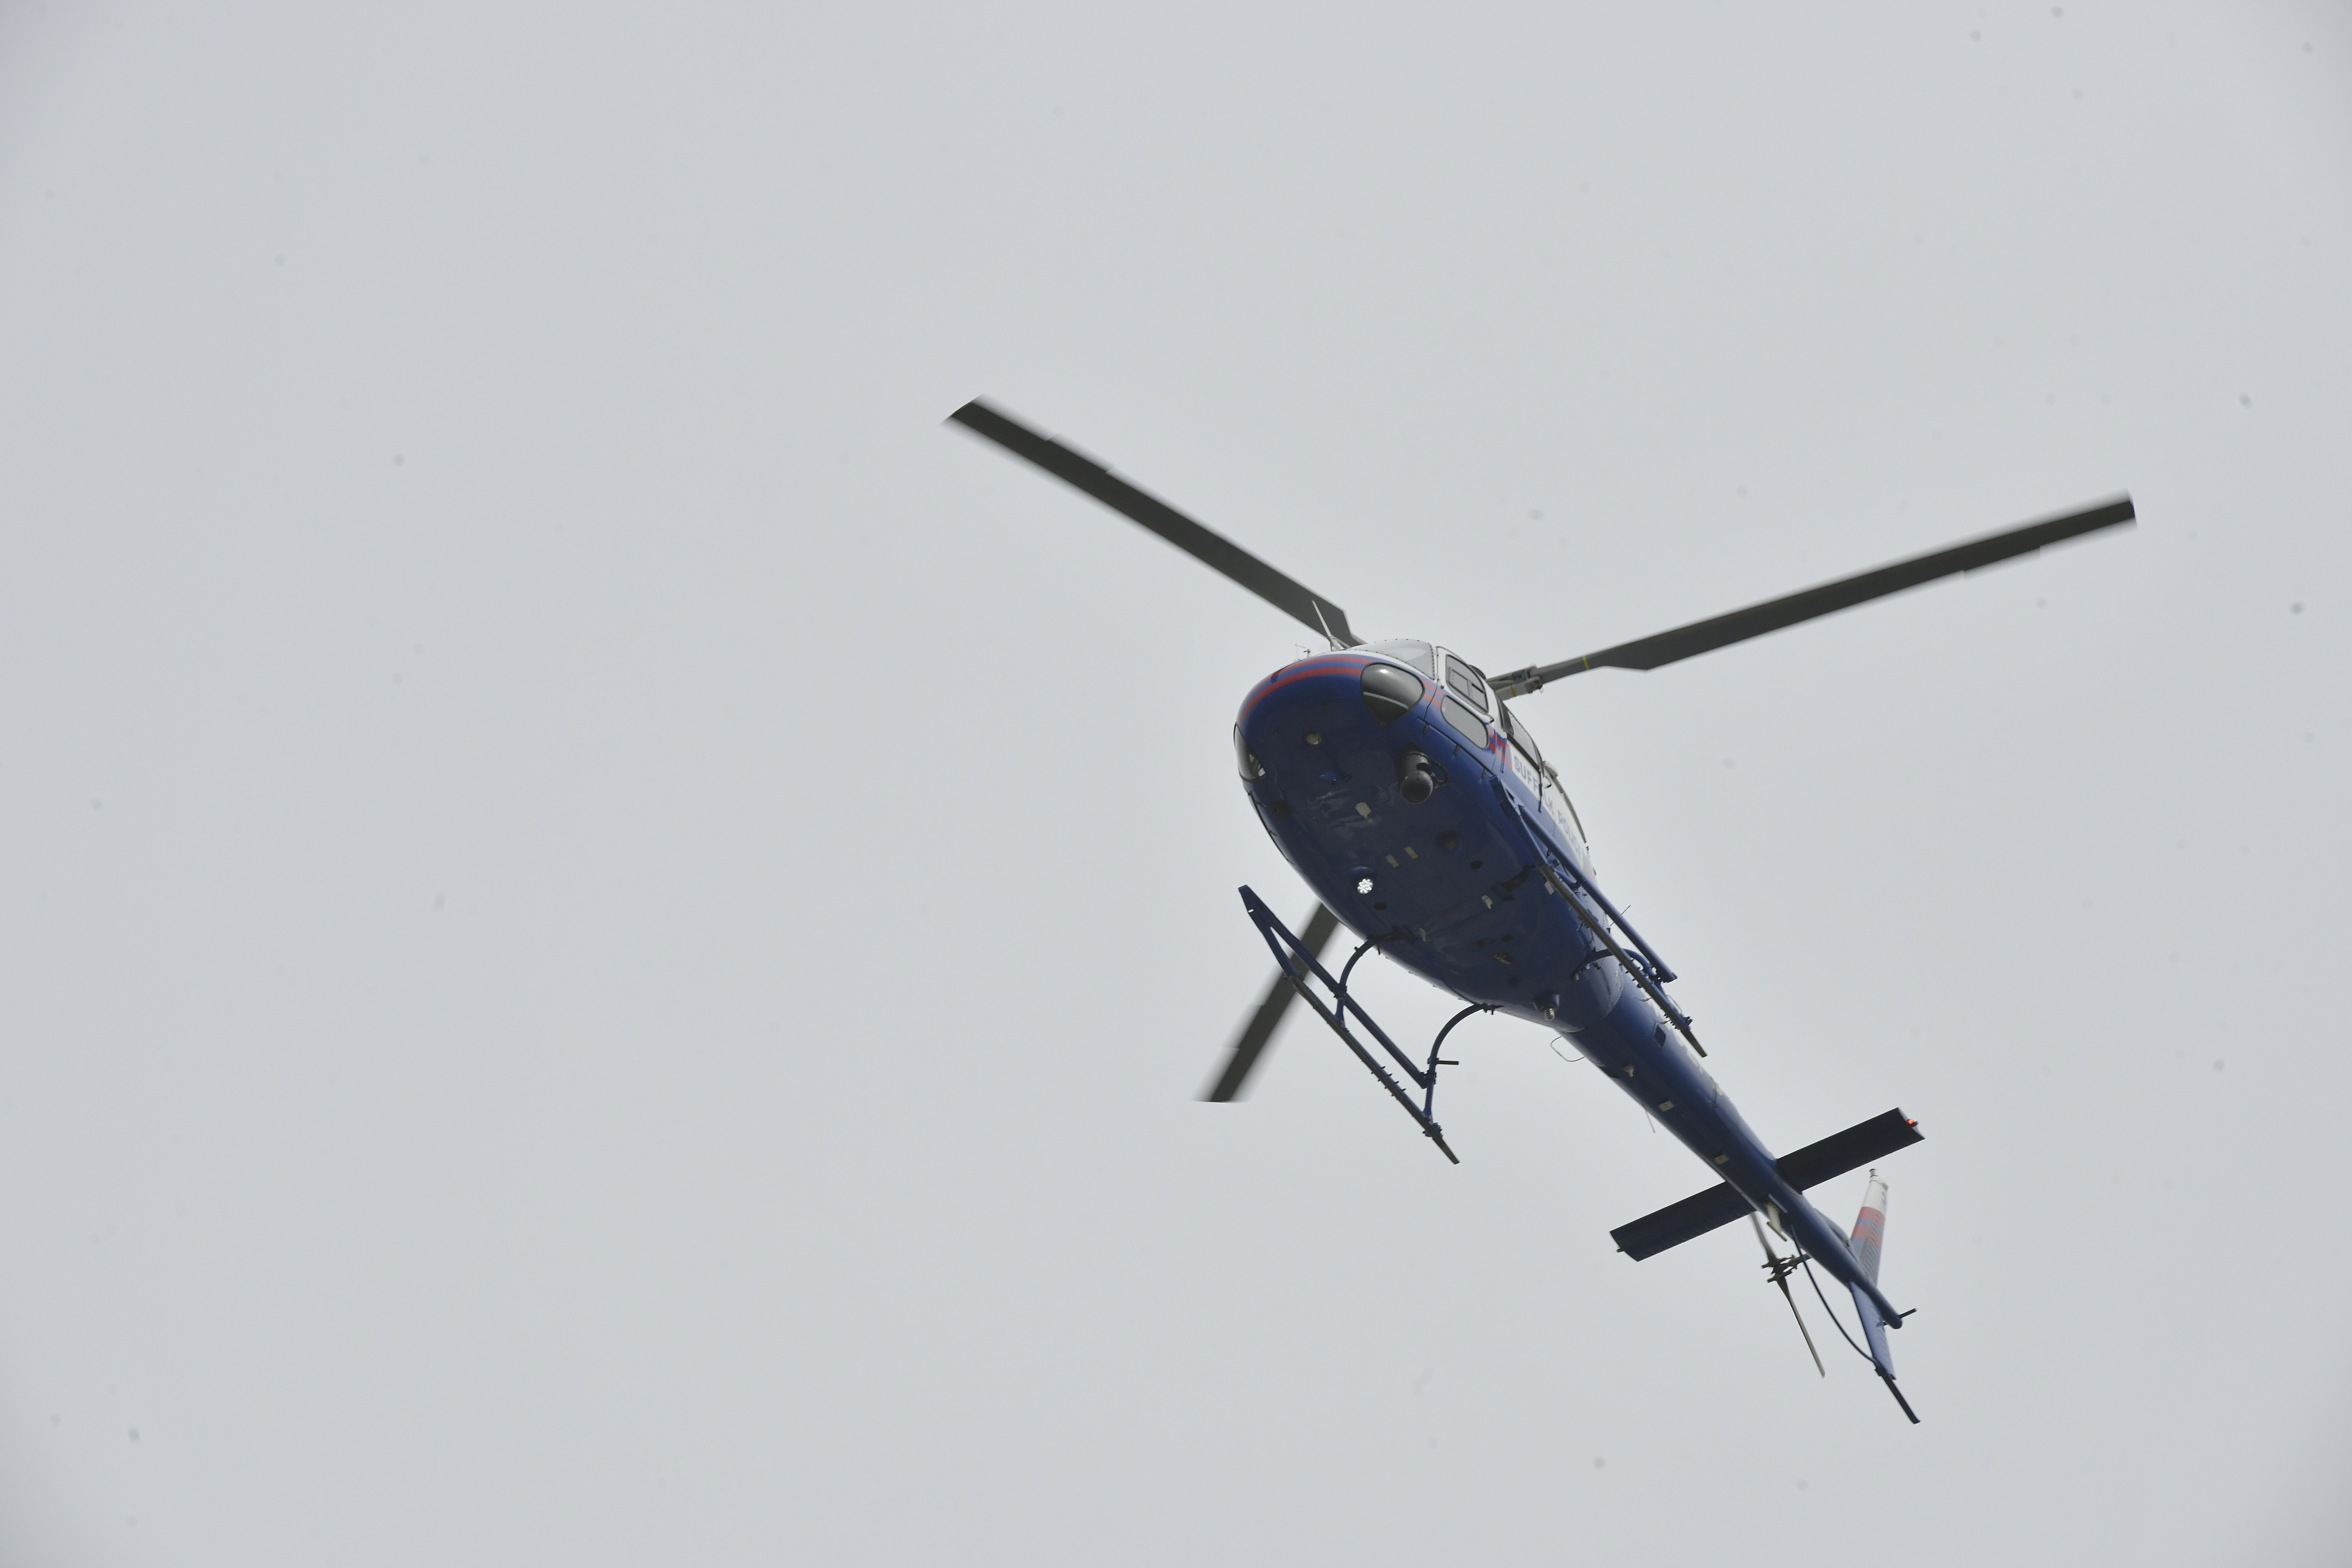 A Suffolk County Police helicopter fly's over the field.